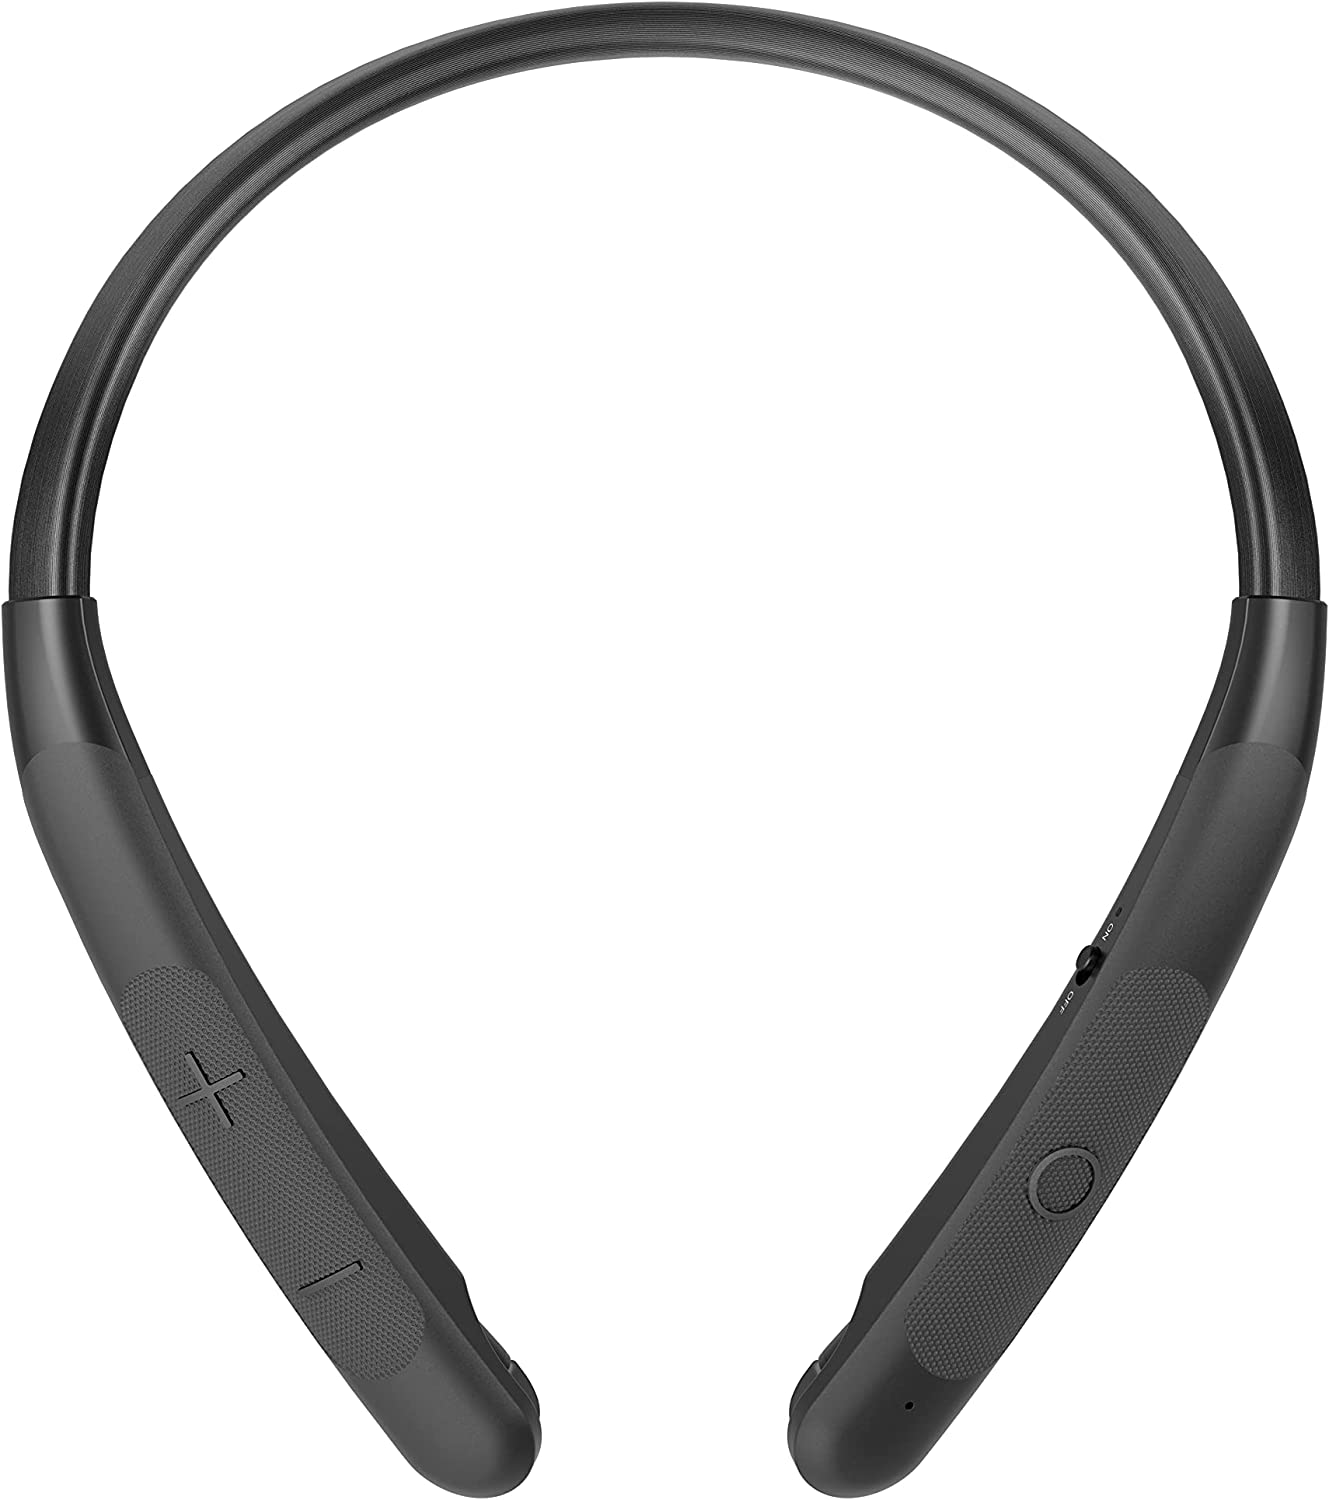 LG TONE NP3 Wireless Stereo Headset with Retractable Earbuds, Black (New)